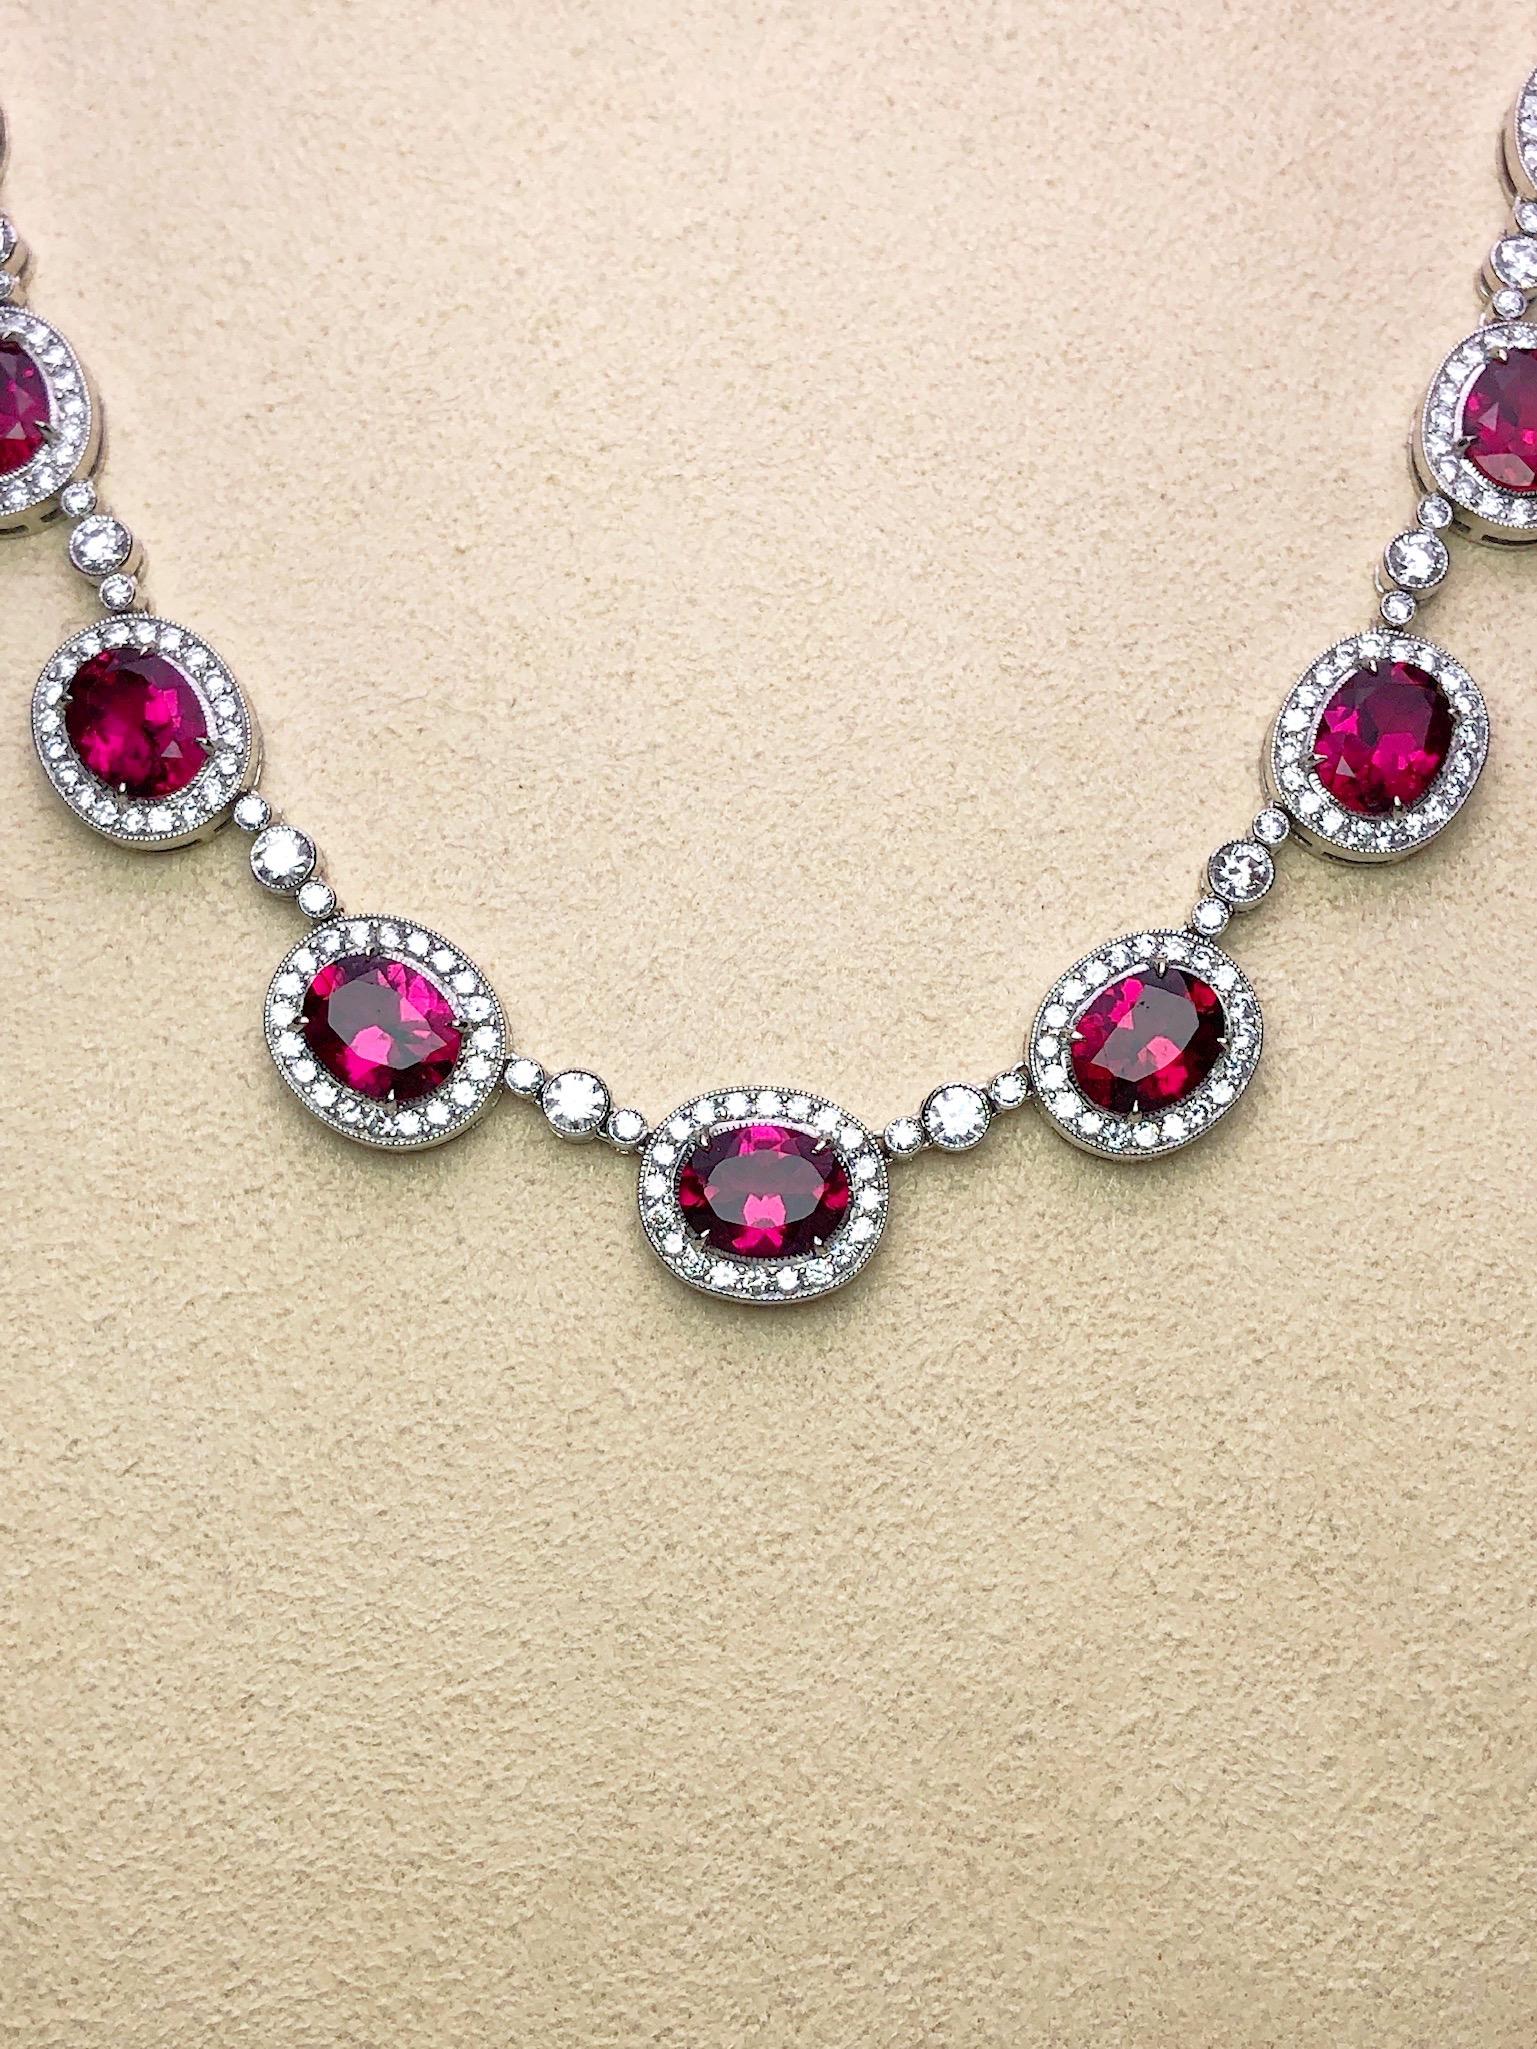 Magnificent 18 kart white gold necklace. This necklace is designed with 22 oval cut Rubelites. Each stone is framed with round brilliant Diamonds. Three bezel set round brilliant Diamonds are the connectors. The total length of the necklace is 17.5